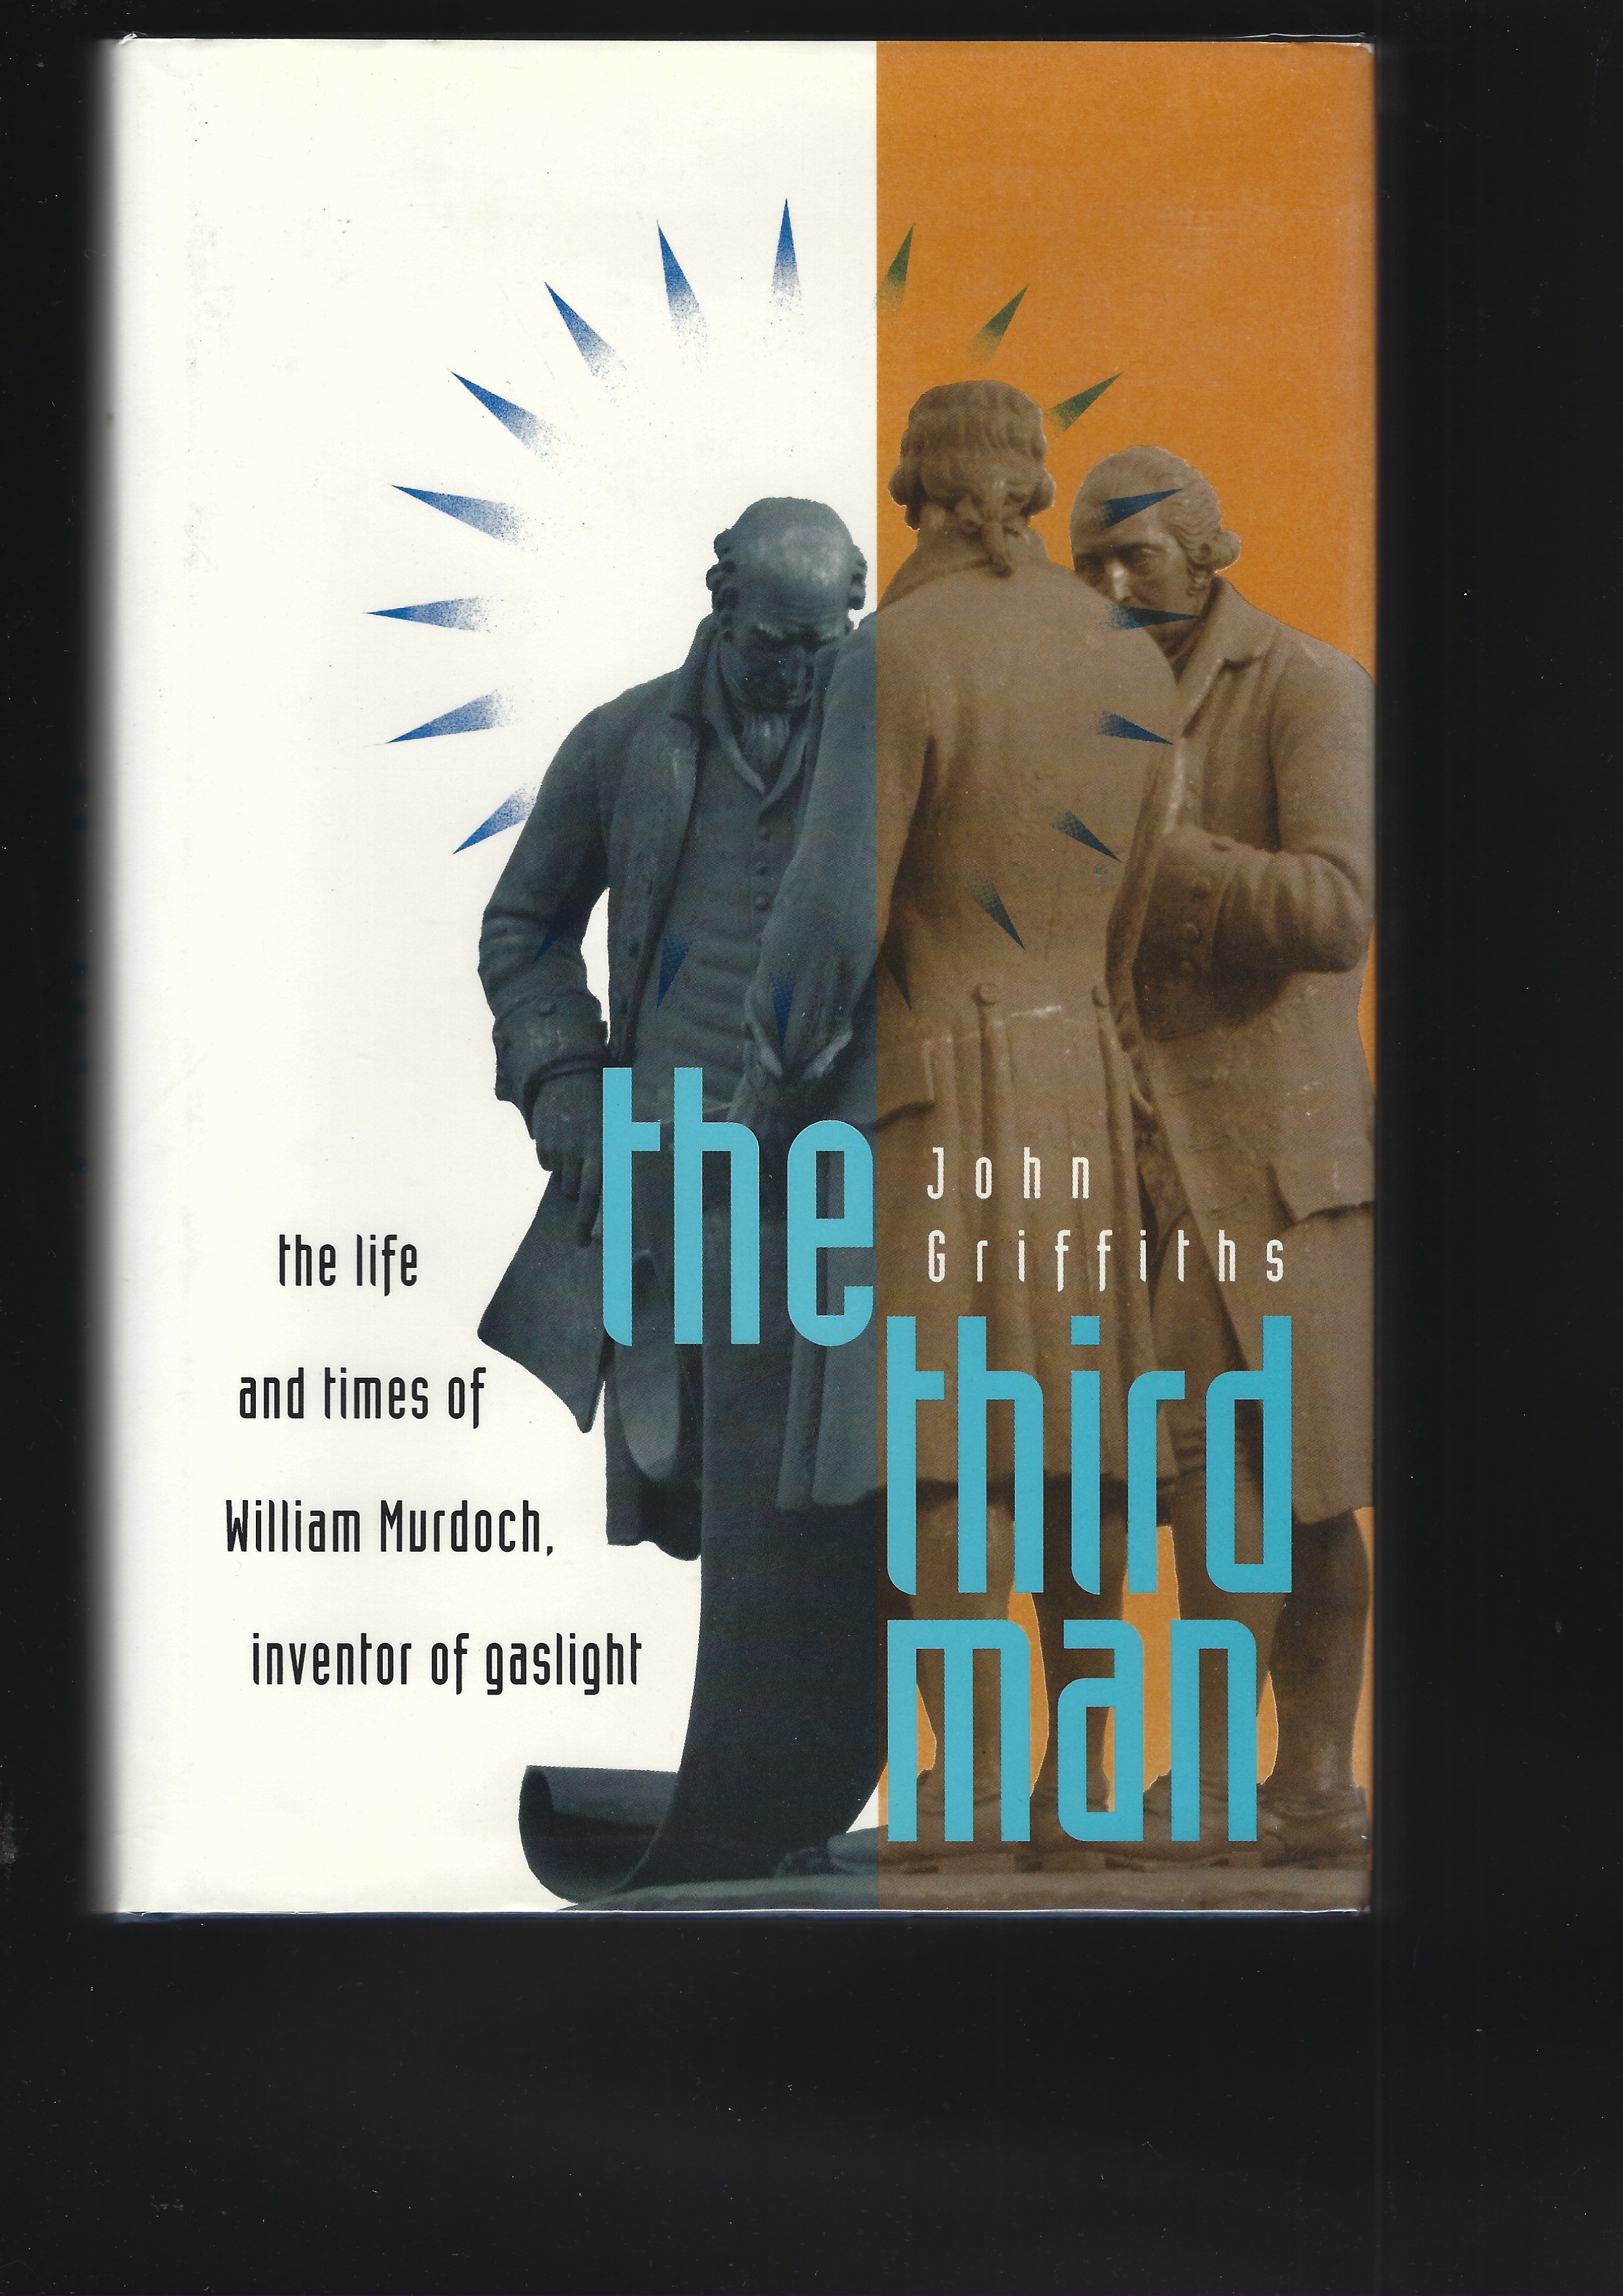 THE THIRD MAN: THE LIFE AND TIMES OF WILLIAM MURDOCH 1754-1839 - Inventor of GaslightING - GRIFFITHS, John